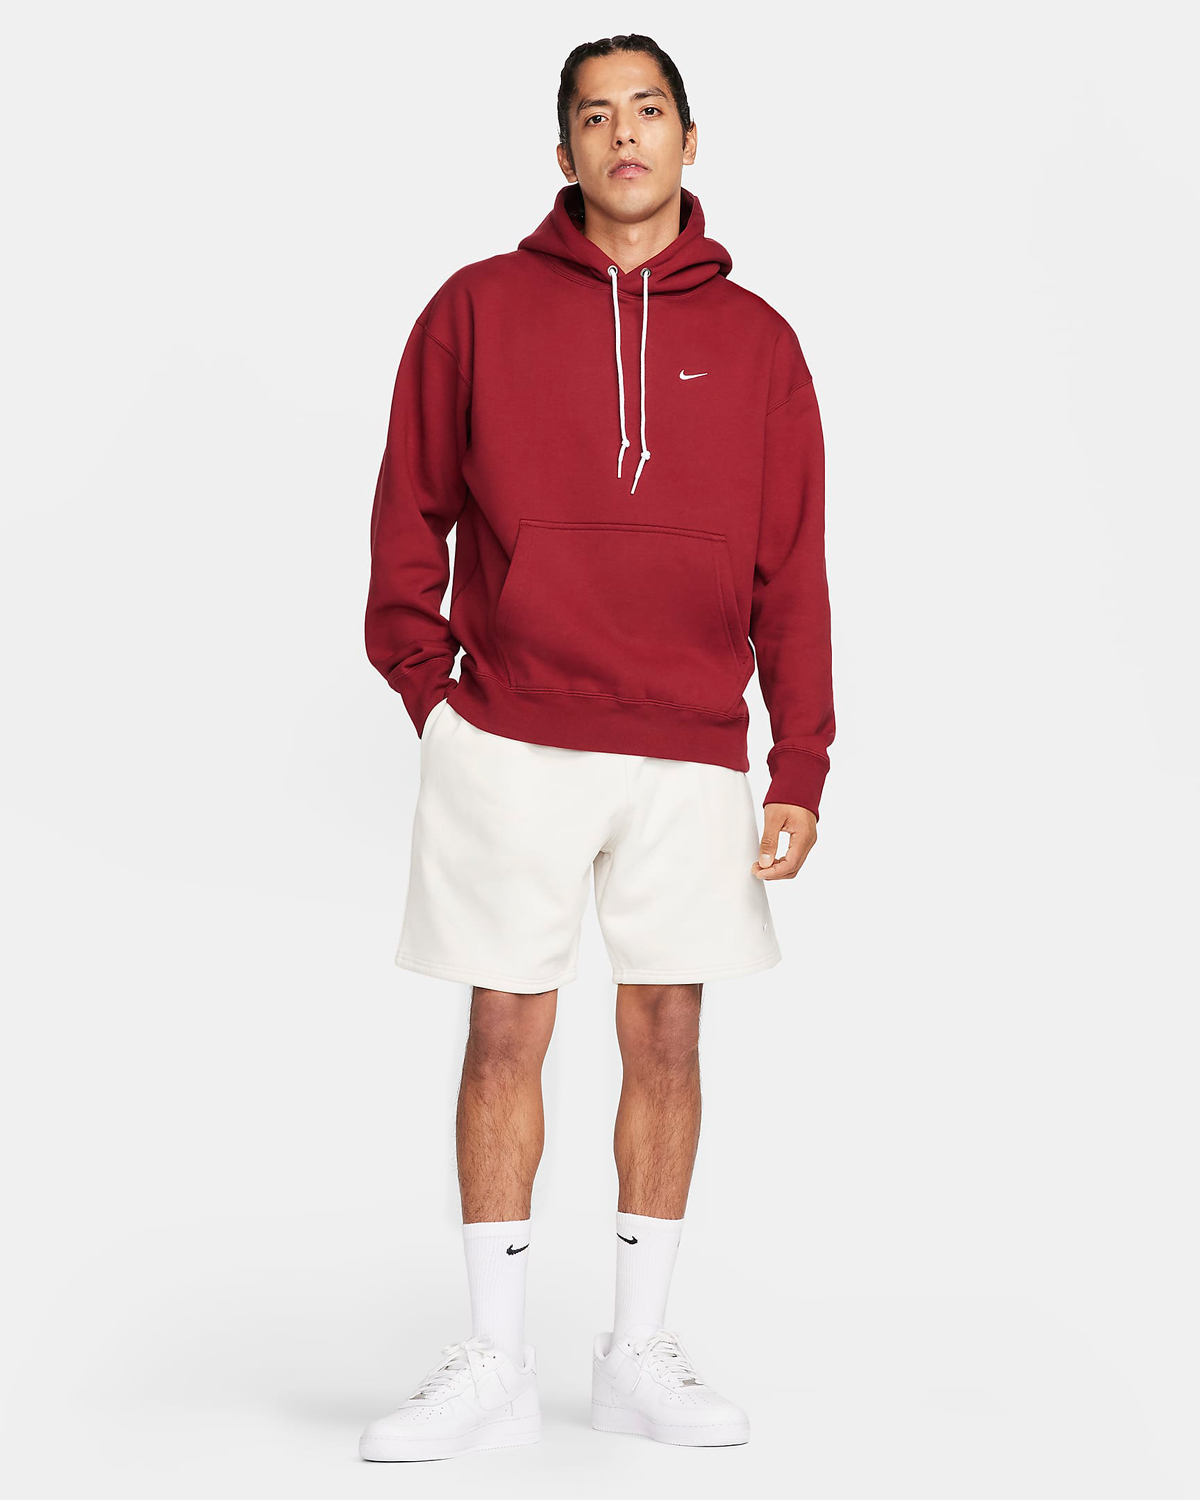 Nike-Solo-Swoosh-Fleece-Pullover-Hoodie-Team-Red-Outfit